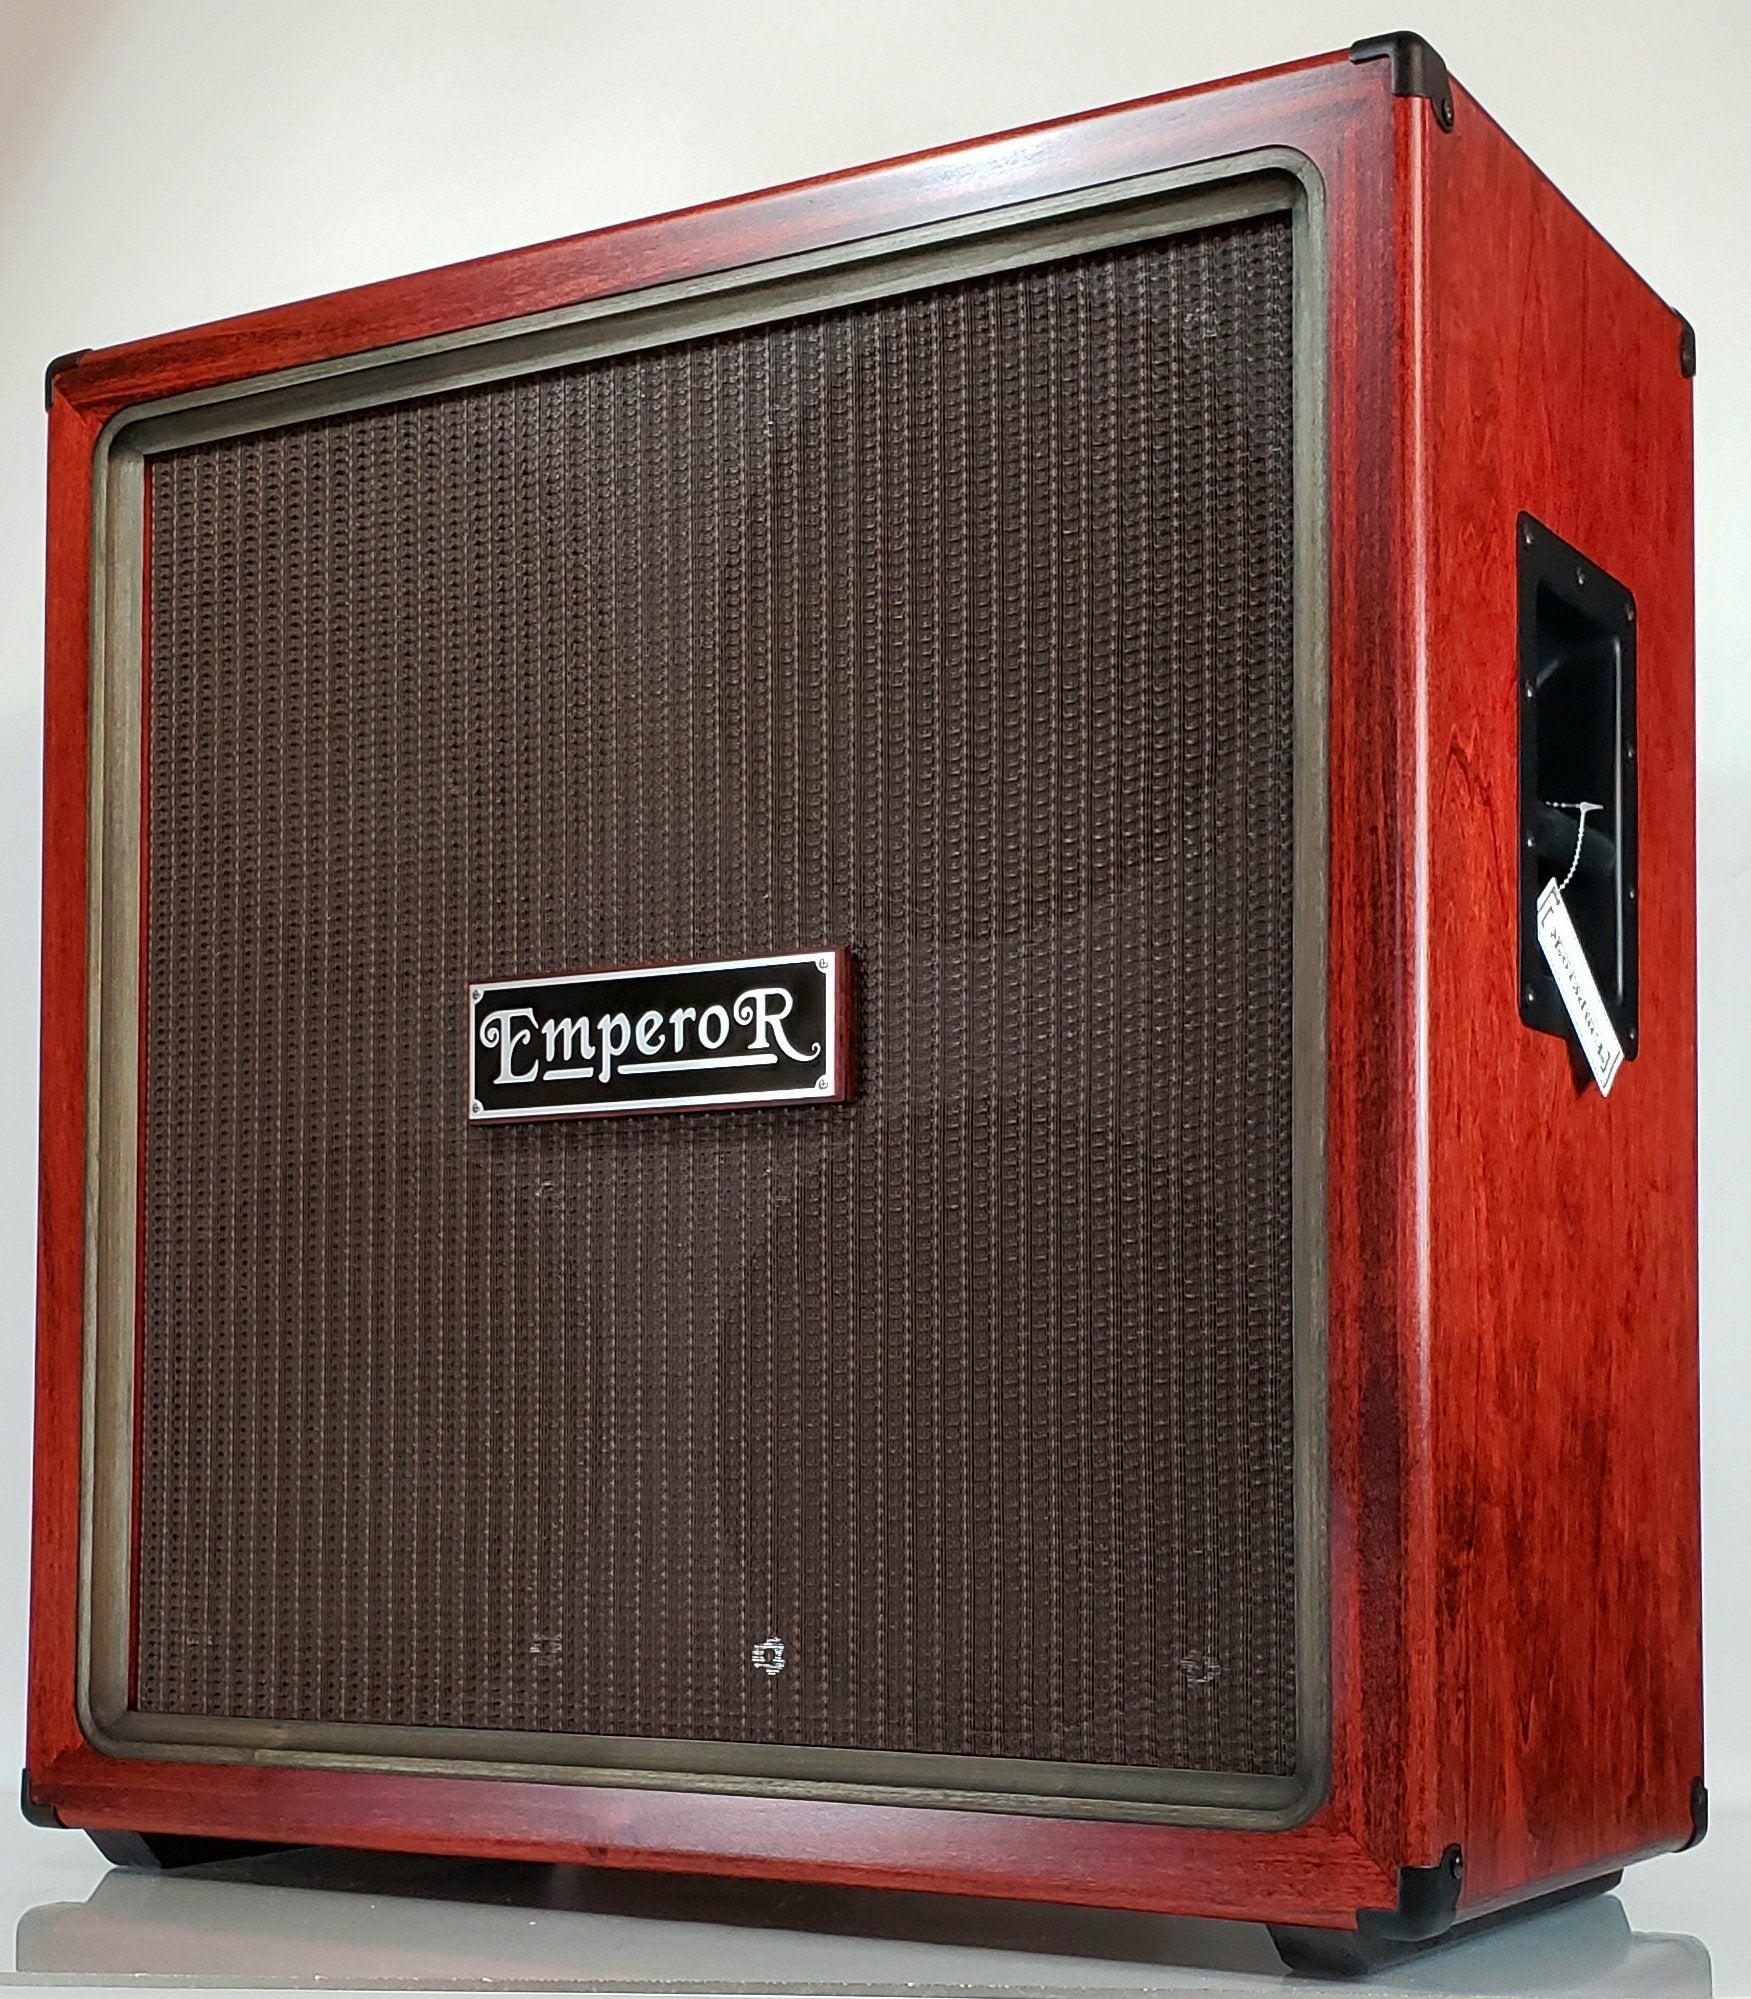 a fine example of an oversized 4x12 guitar speaker cabinet